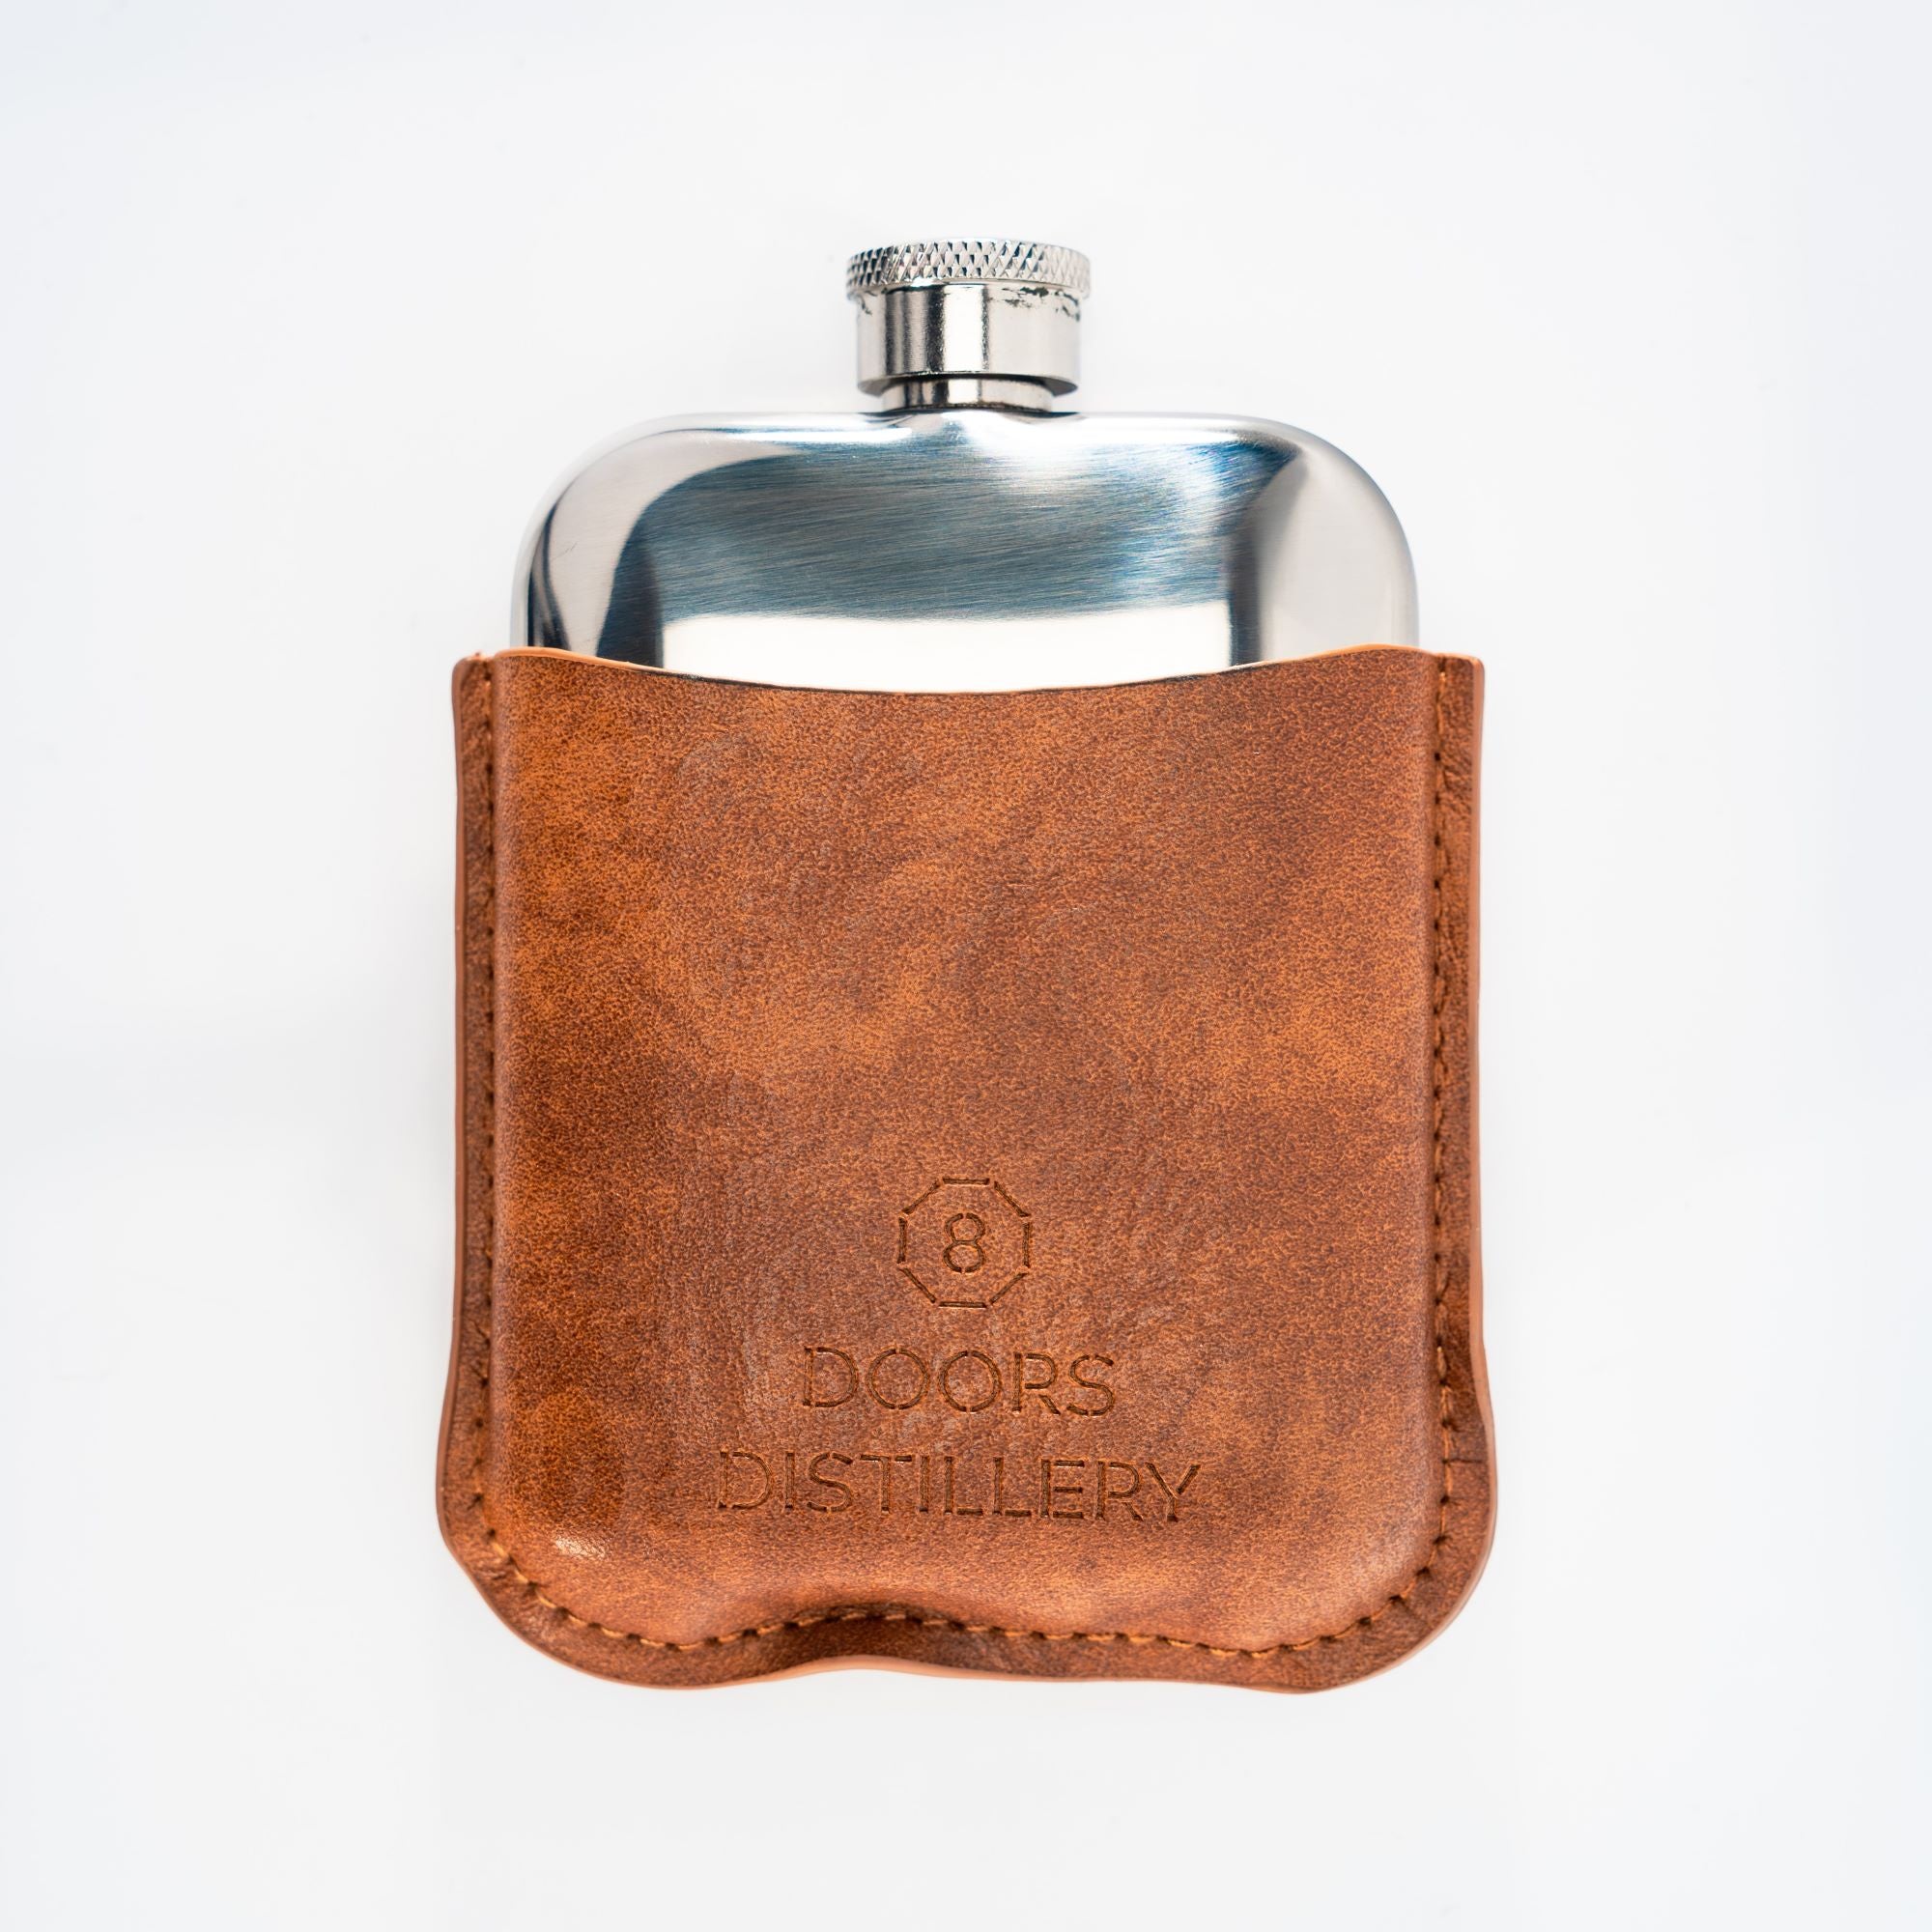 Chrome Hip Flask with leather pouch